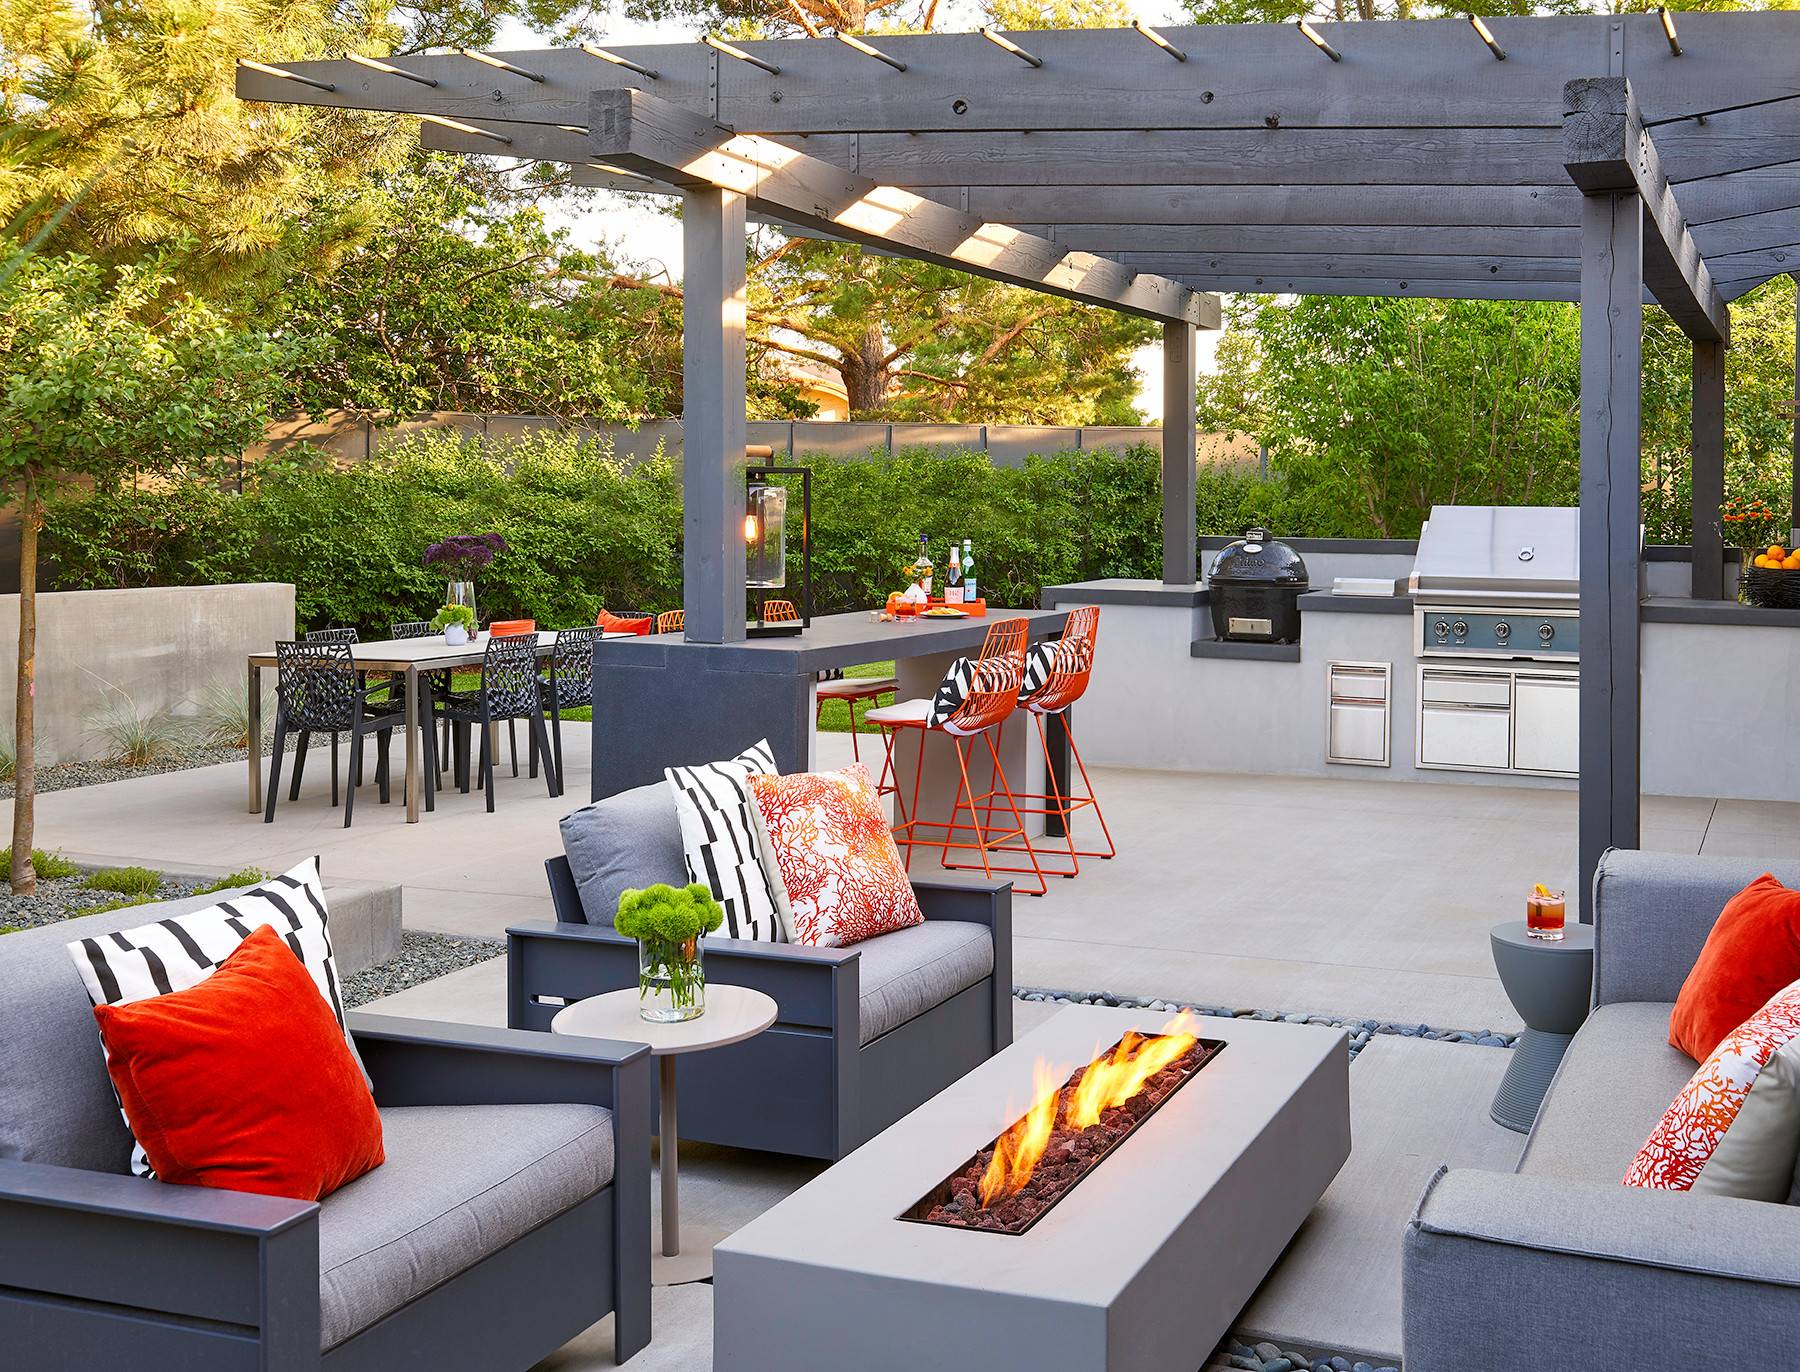 Orange accents to enhance the outdoor seating area (from Houzz)